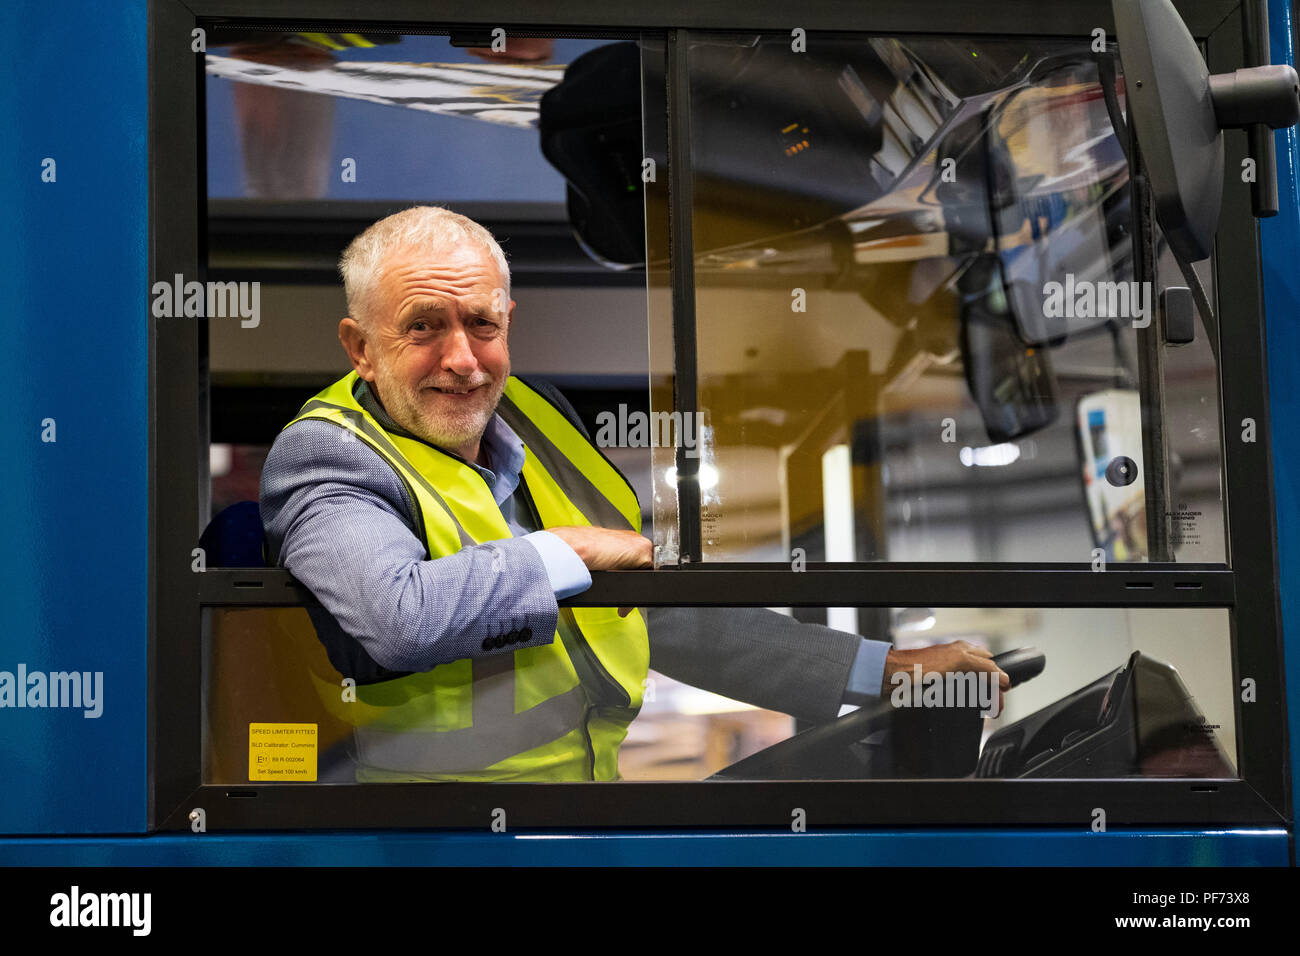 Falkirk, Scotland, UK; 20 August, 2018. Labour Leader Jeremy Corbyn and Scottish Labour Leader Richard Leonard visit Alexander Dennis bus manufacturers in Falkirk as part of Labour's 'Build it in Britain' policy. Credit: Iain Masterton/Alamy Live News Stock Photo